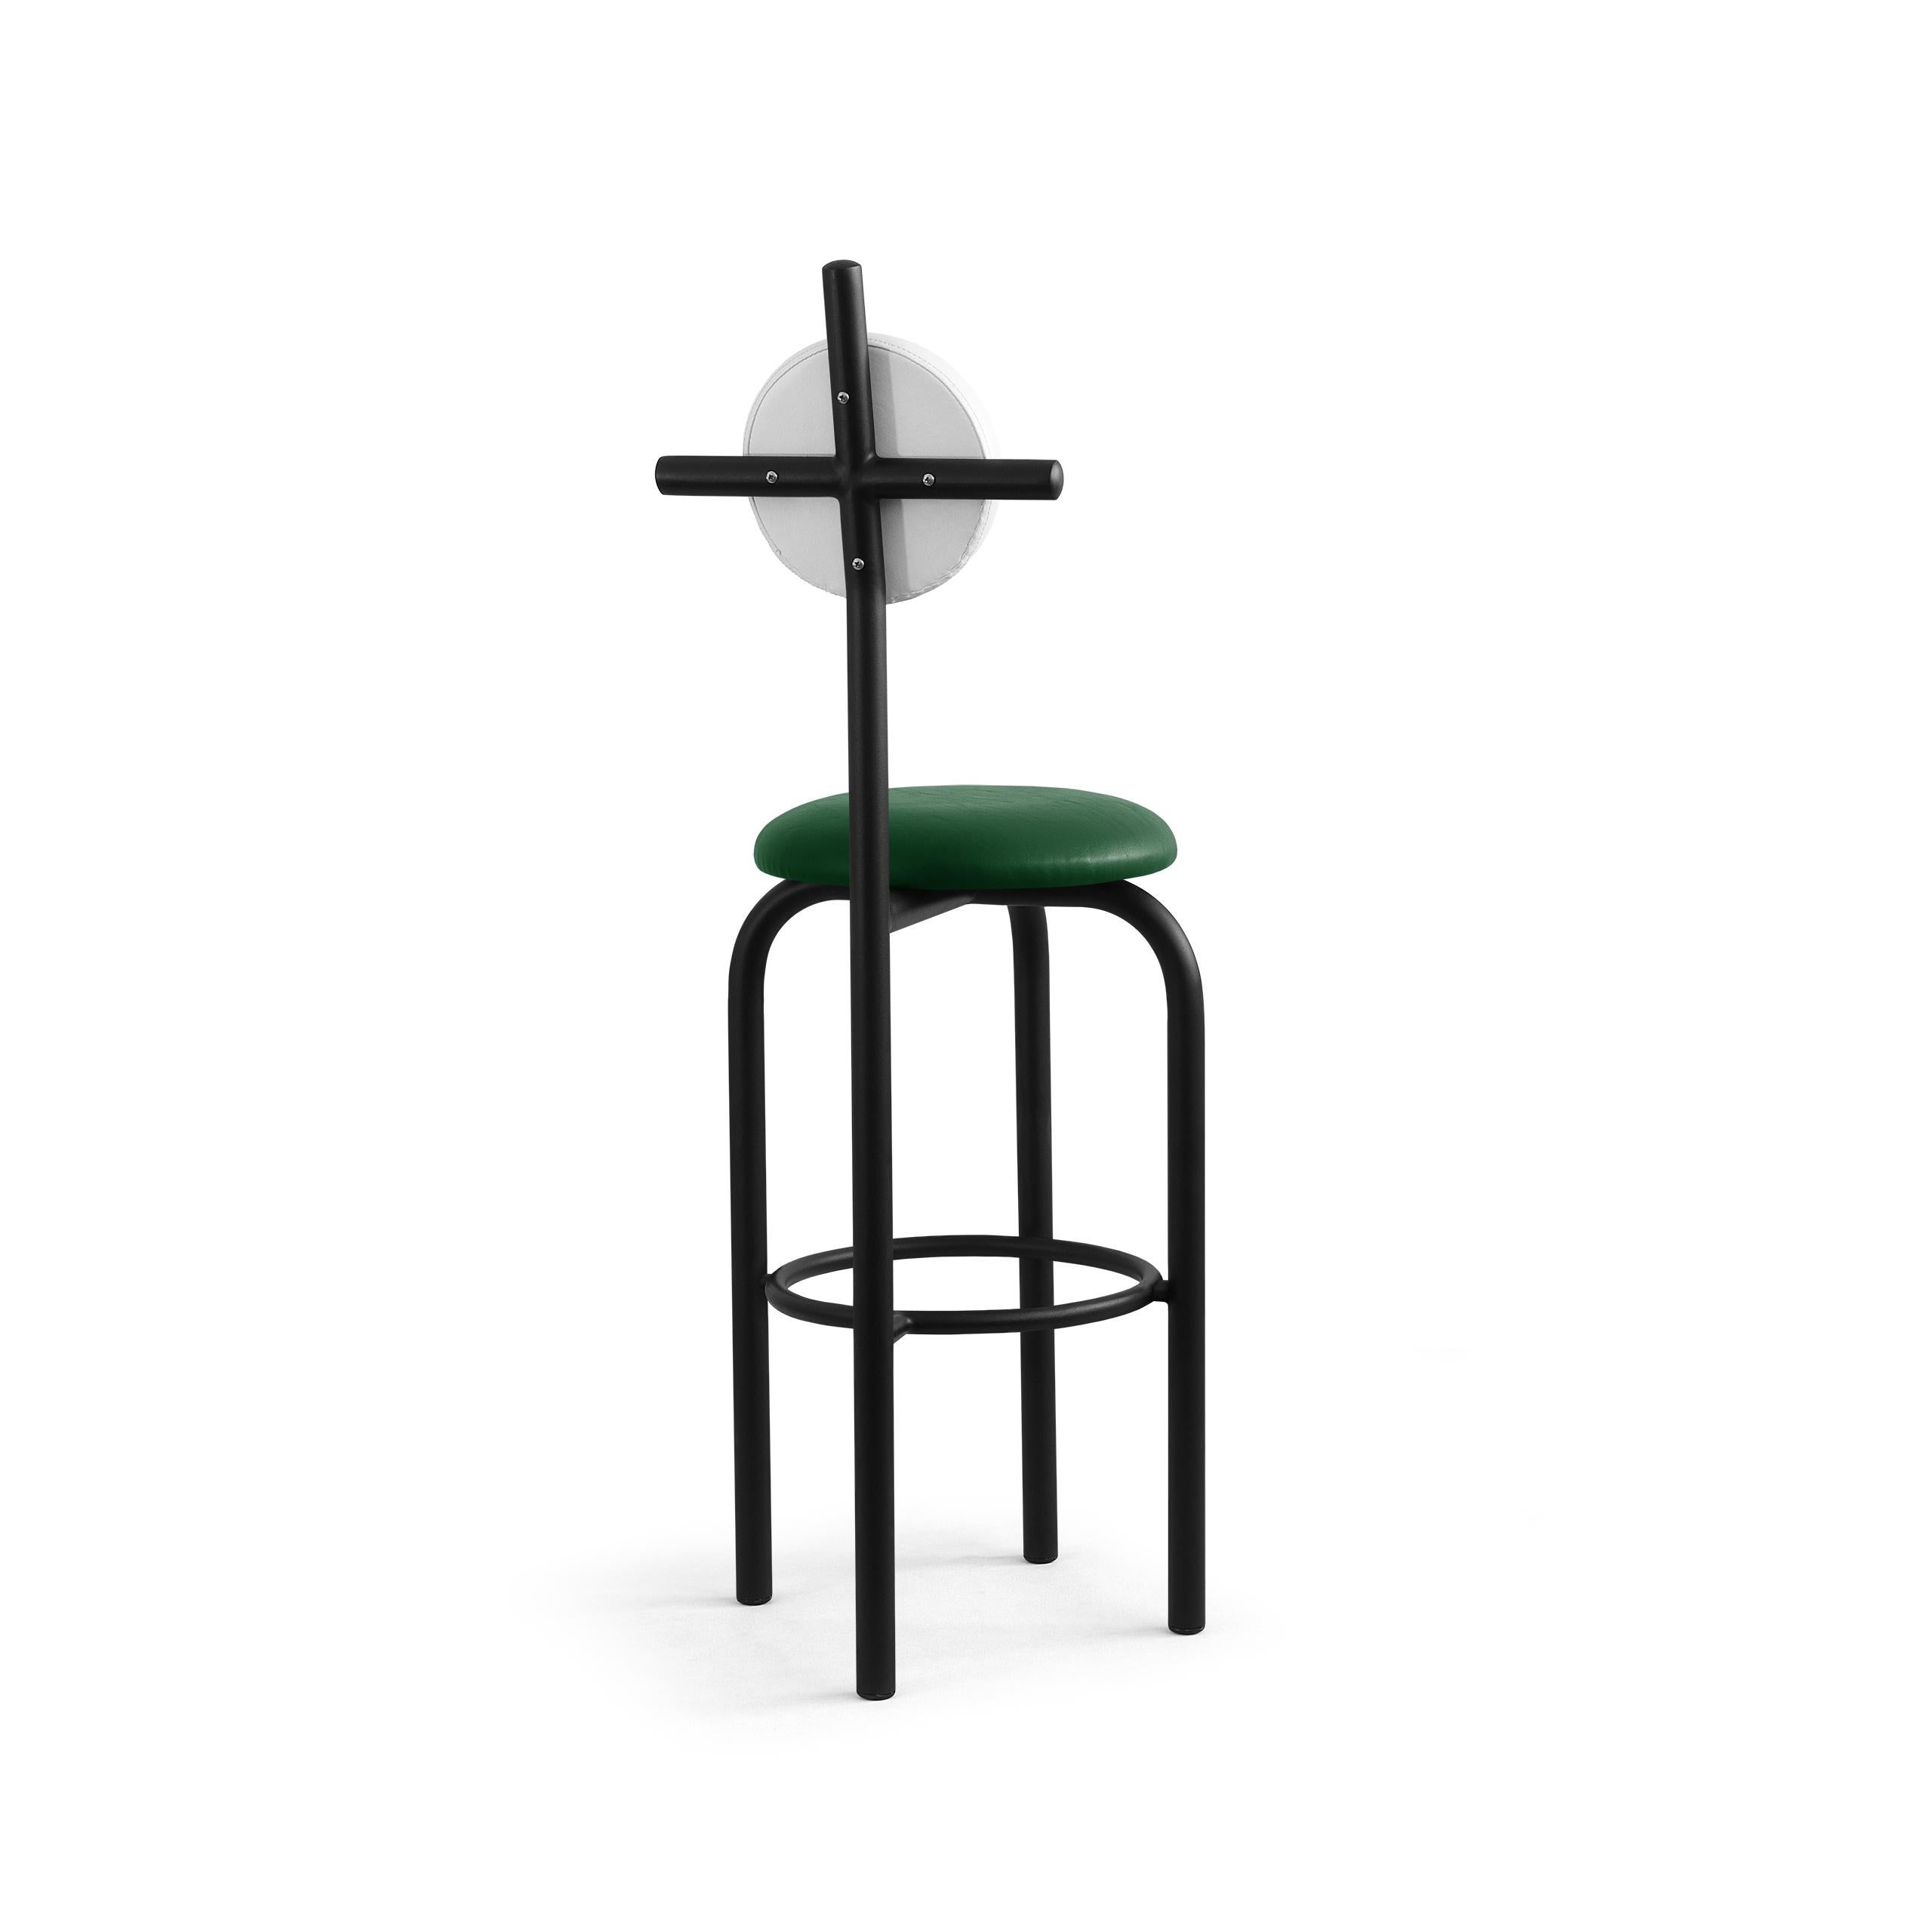 PK19 Impermeable Bar Stool, Green Seat & Black Metal Structure by Paulo Kobylka In New Condition For Sale In Londrina, Paraná